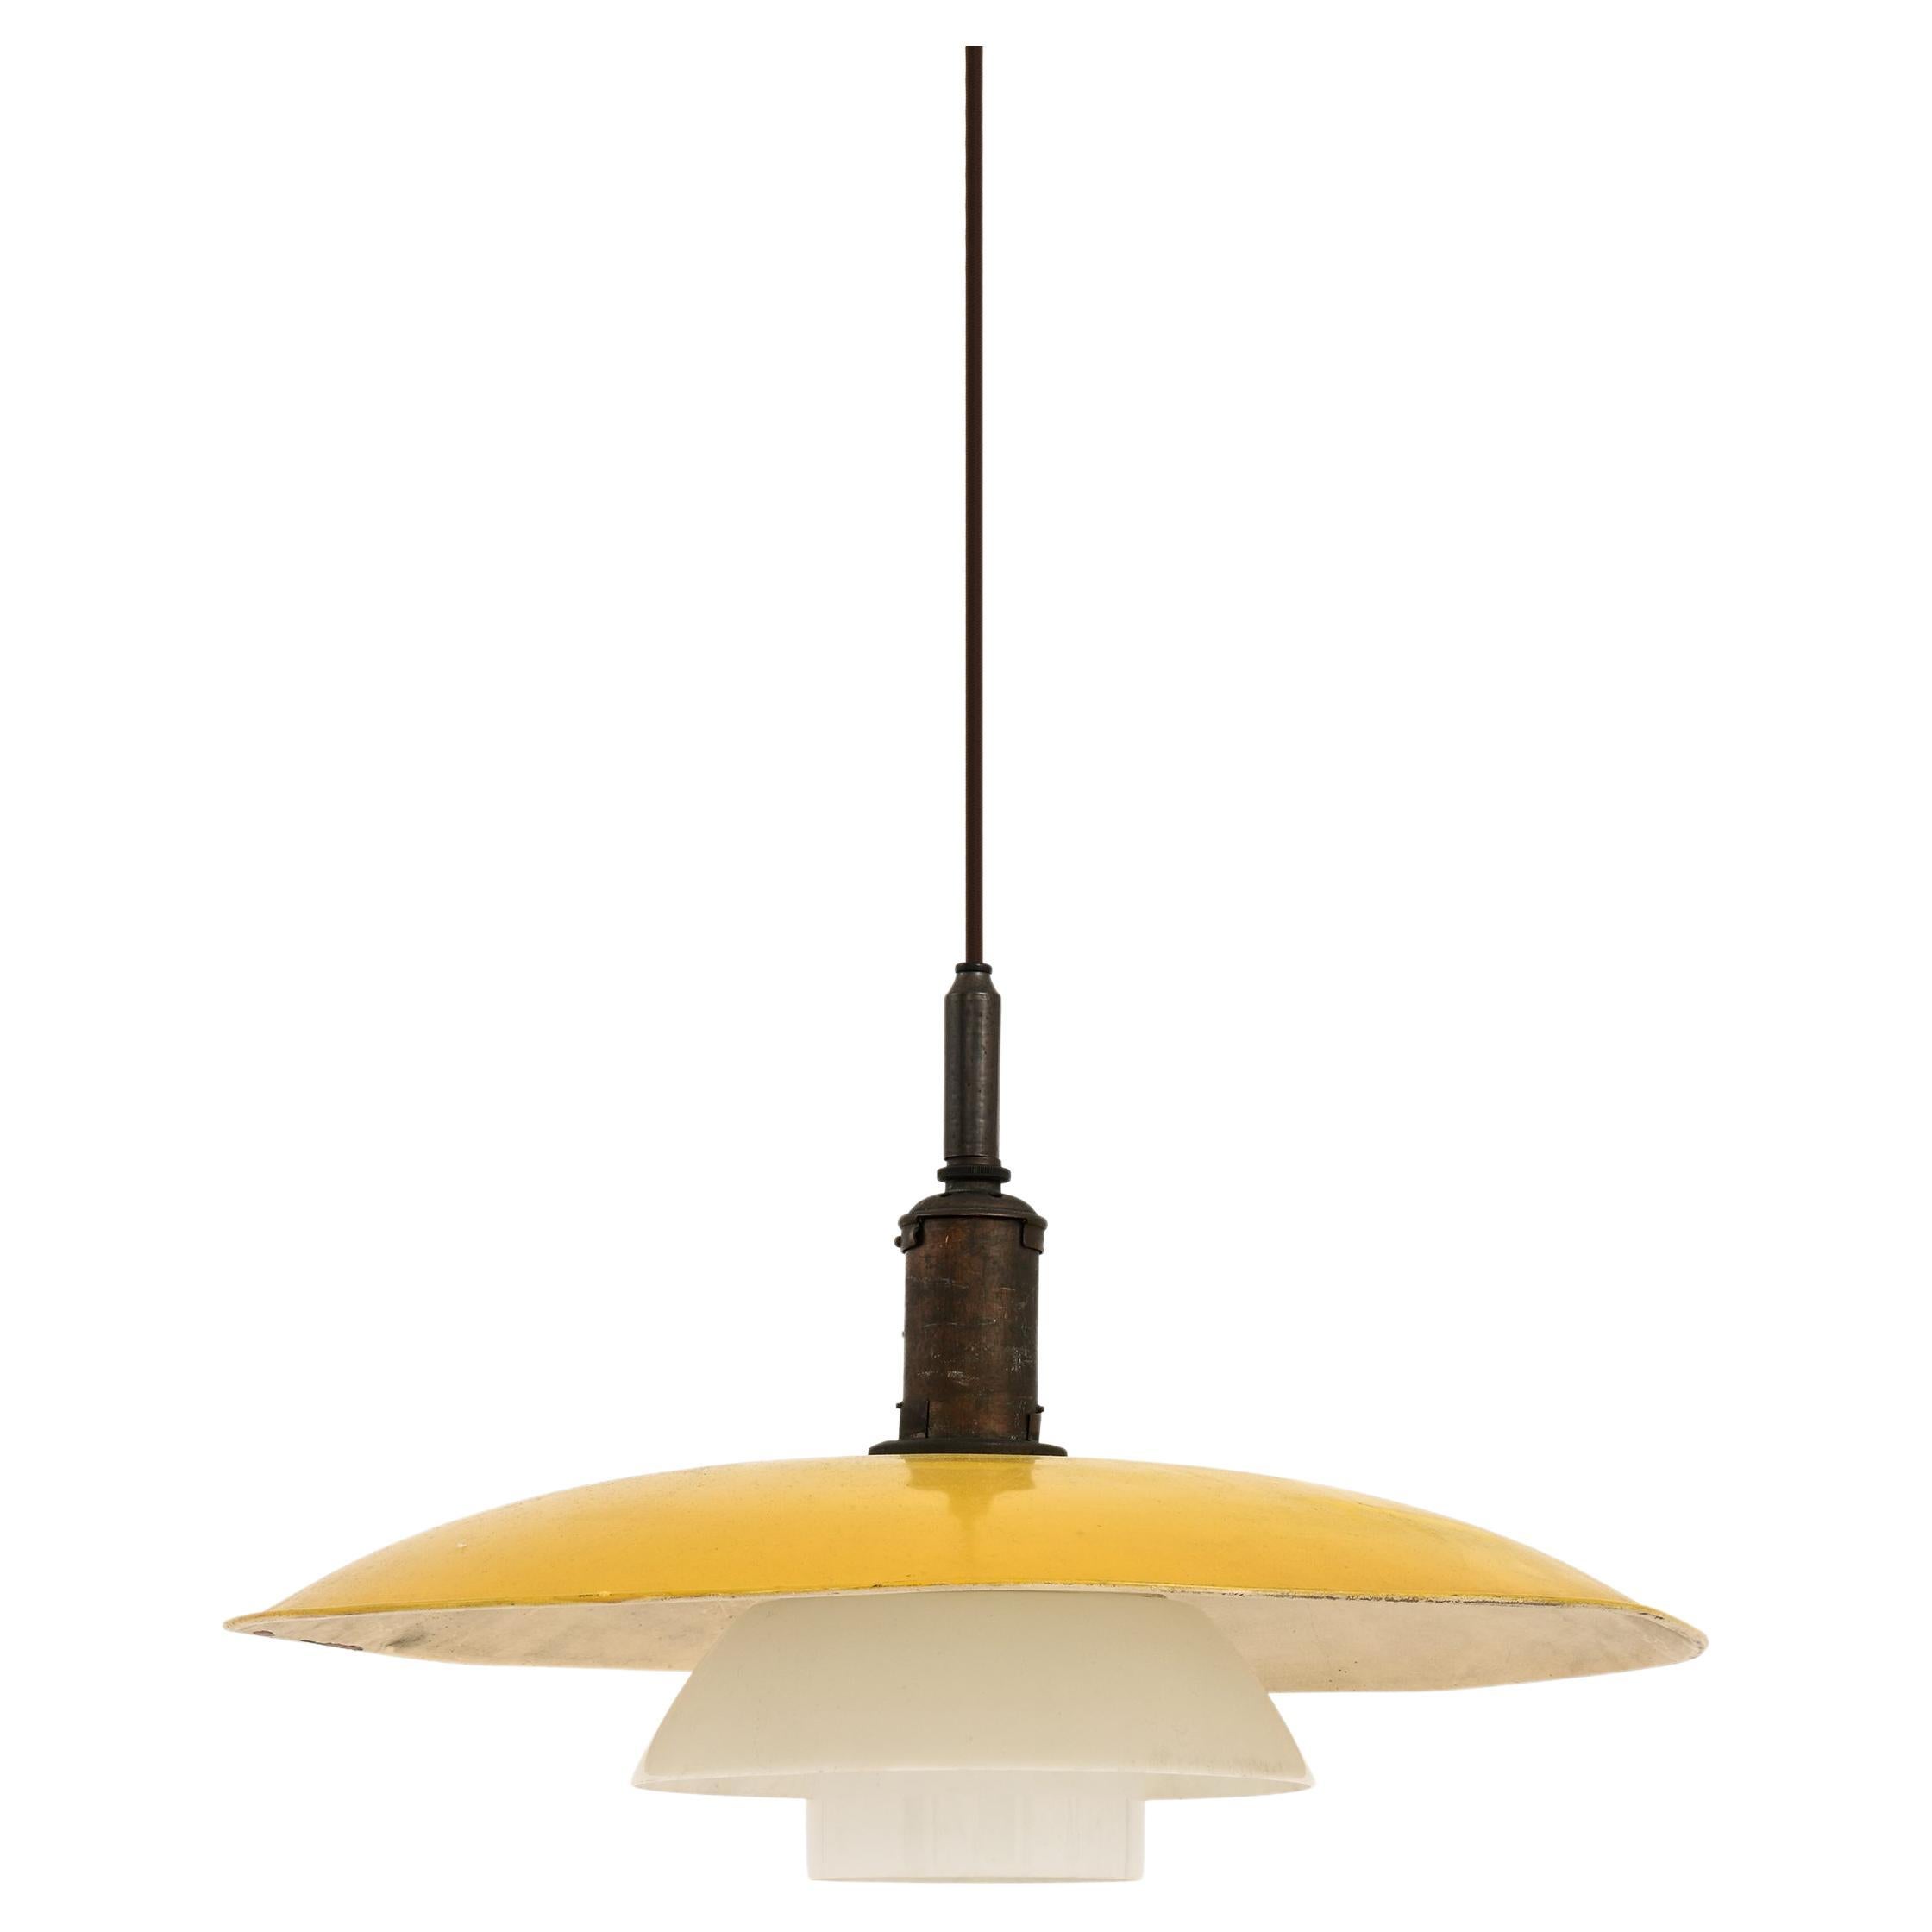 Ceiling Lamp in Yellow Metal, Brass and Opaline Glass by Poul Henningsen, 1930’s For Sale